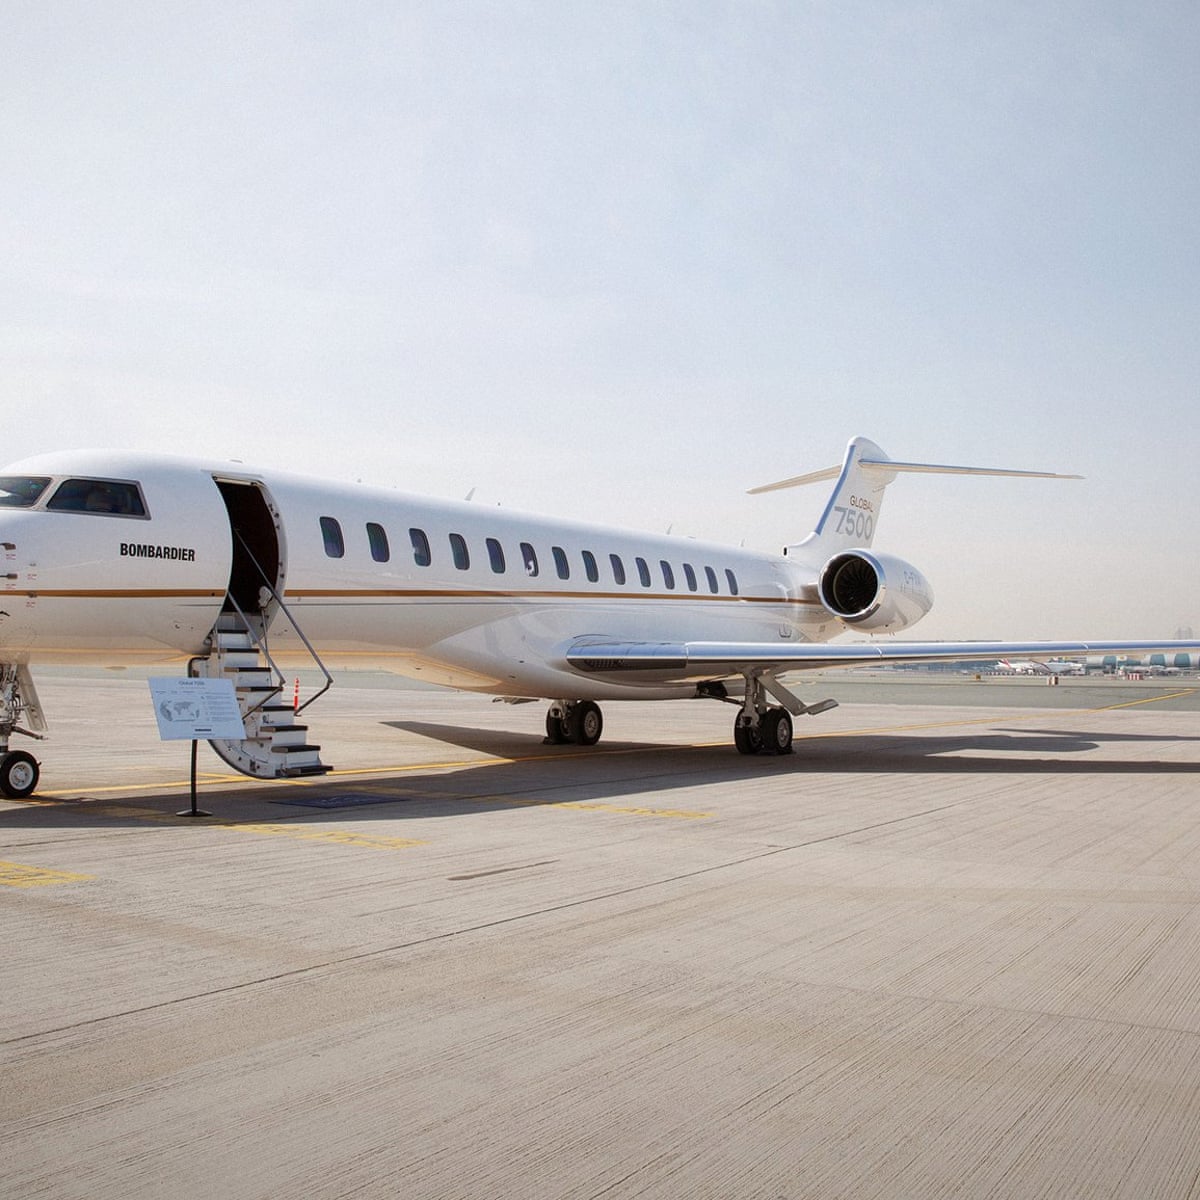 Can You Smoke On A Private Jet Super Rich Fuelling Growing Demand For Private Jets Report Finds Environment The Guardian